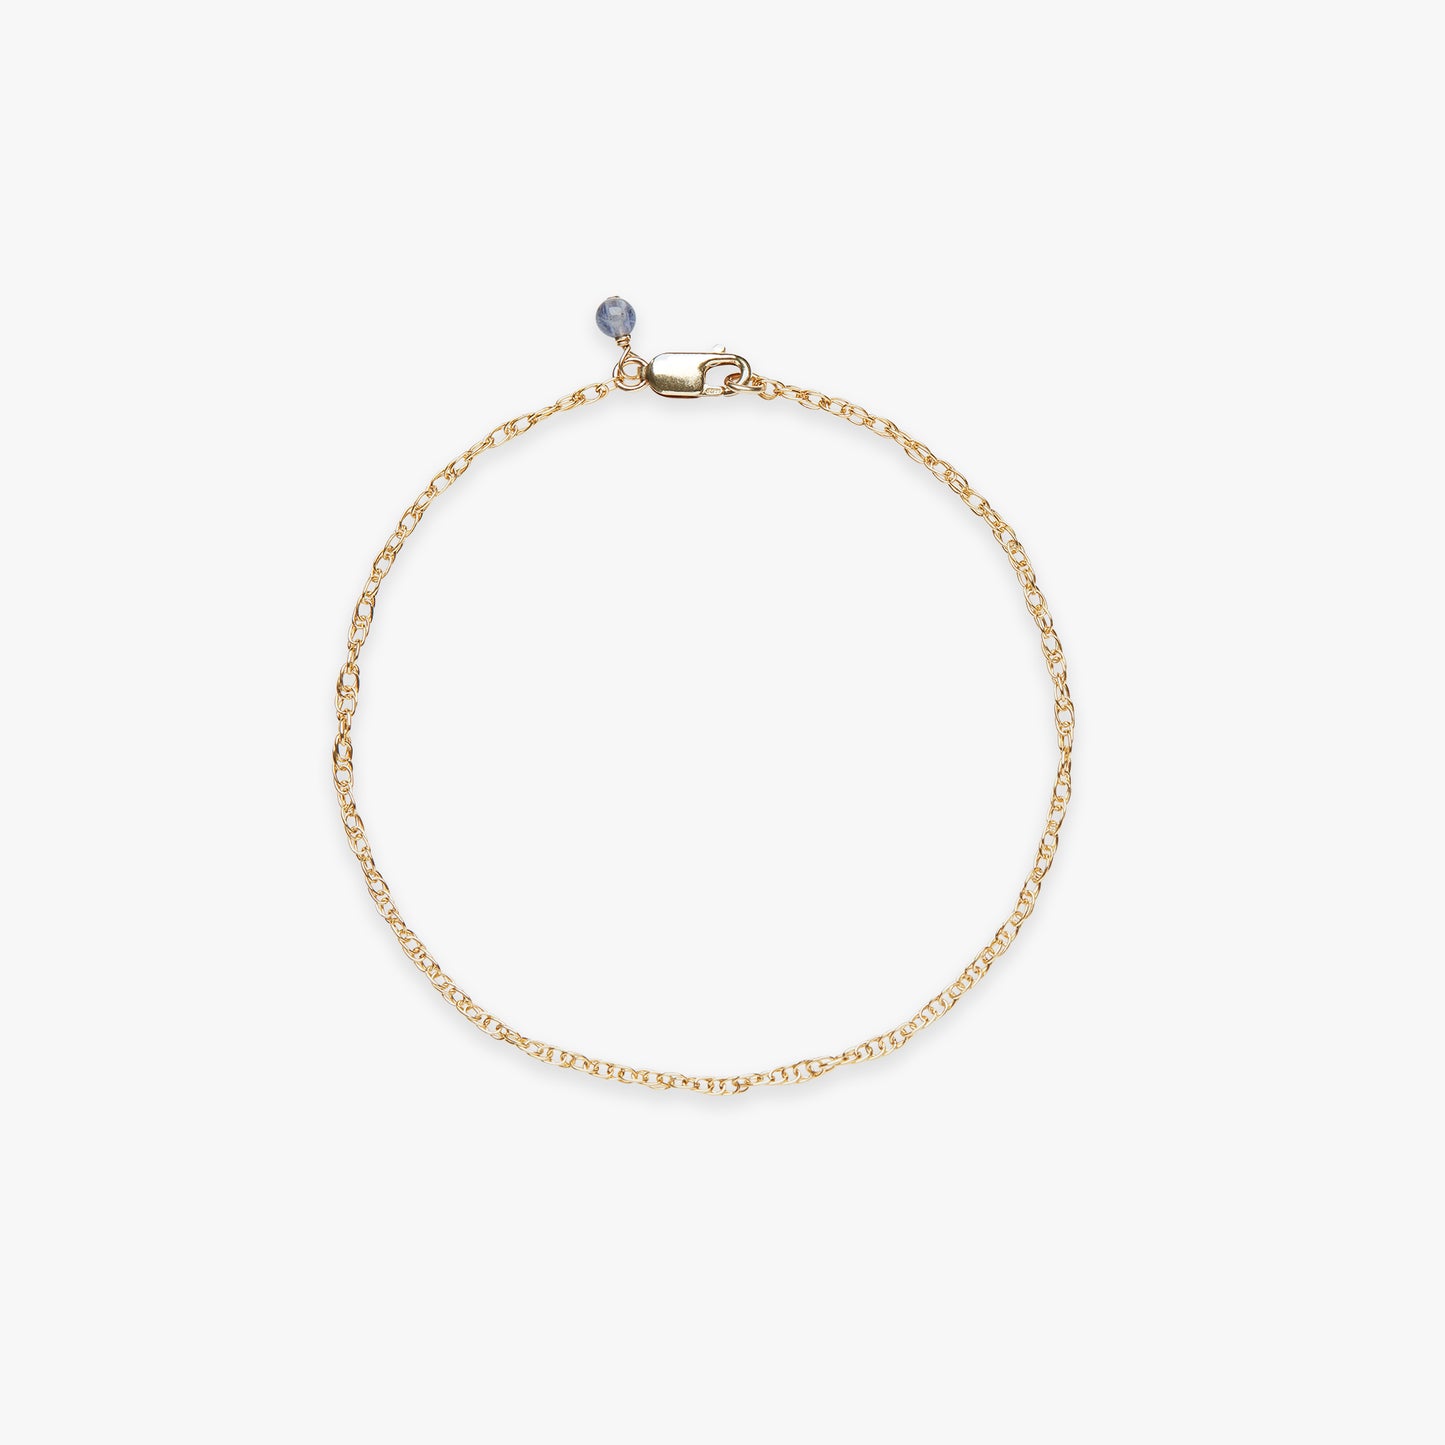 Laad afbeelding in Galerijviewer, Twist chain armband gold filled
